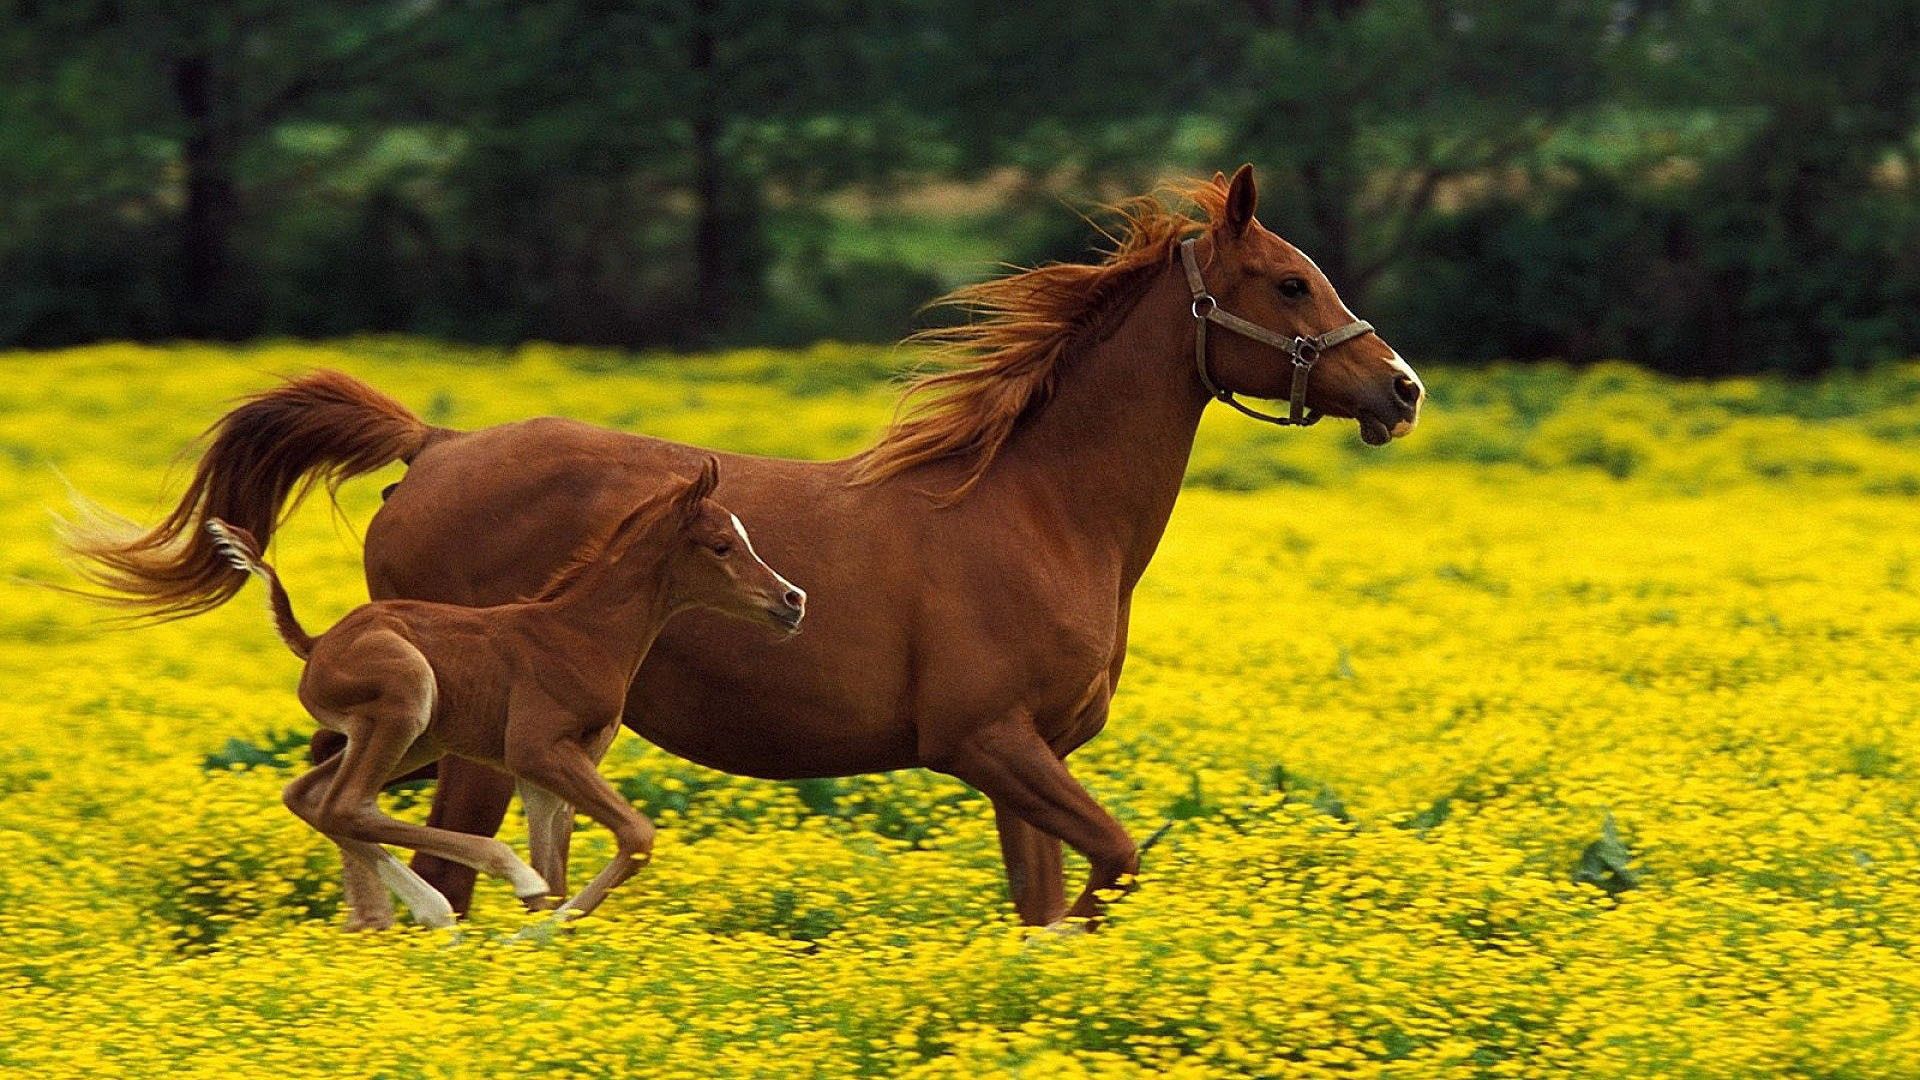 Horse wallpapers for desktop, download free Horse pictures and backgrounds  for PC 